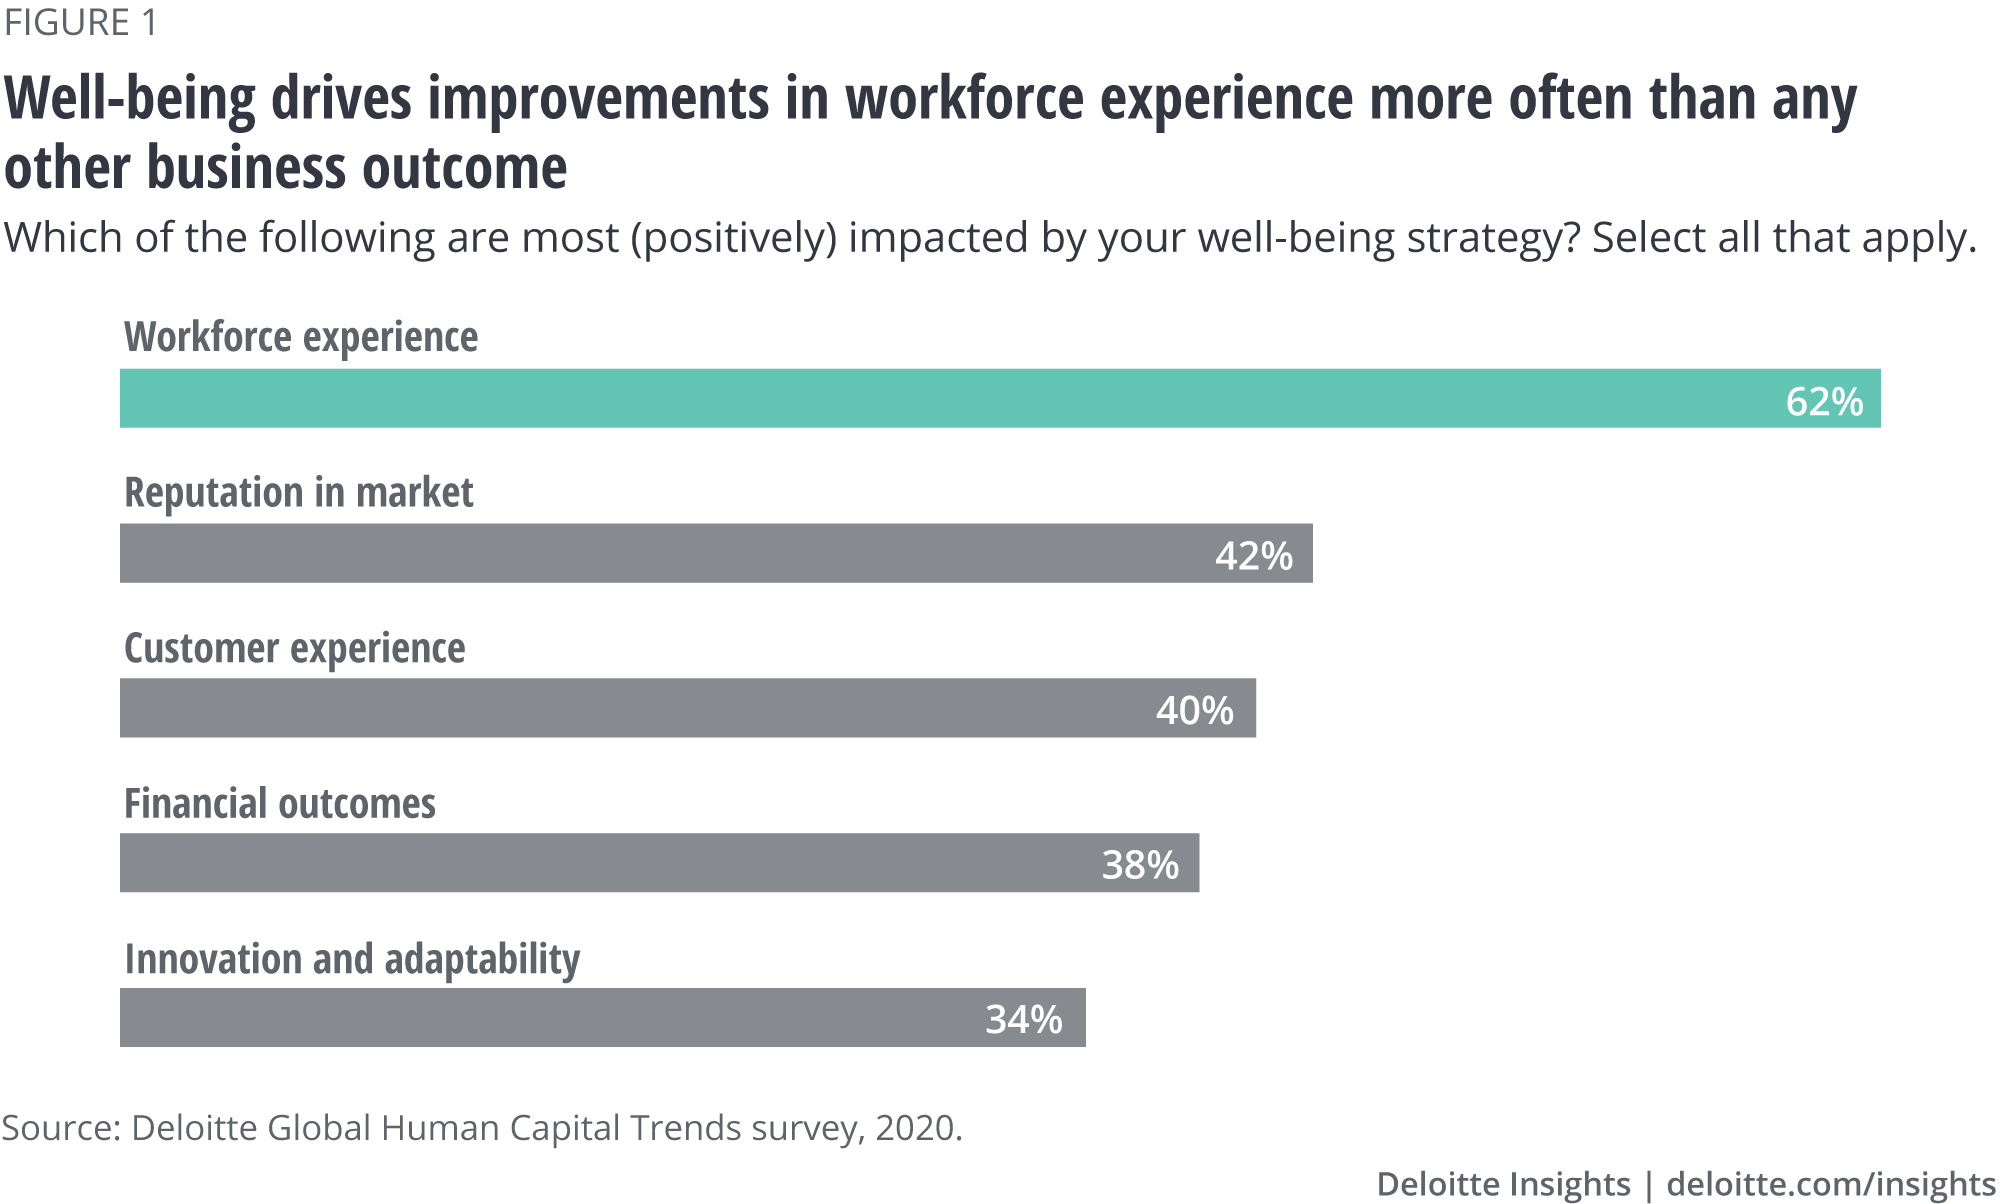 Well-being drives improvements in workforce experience more often than any other business outcome